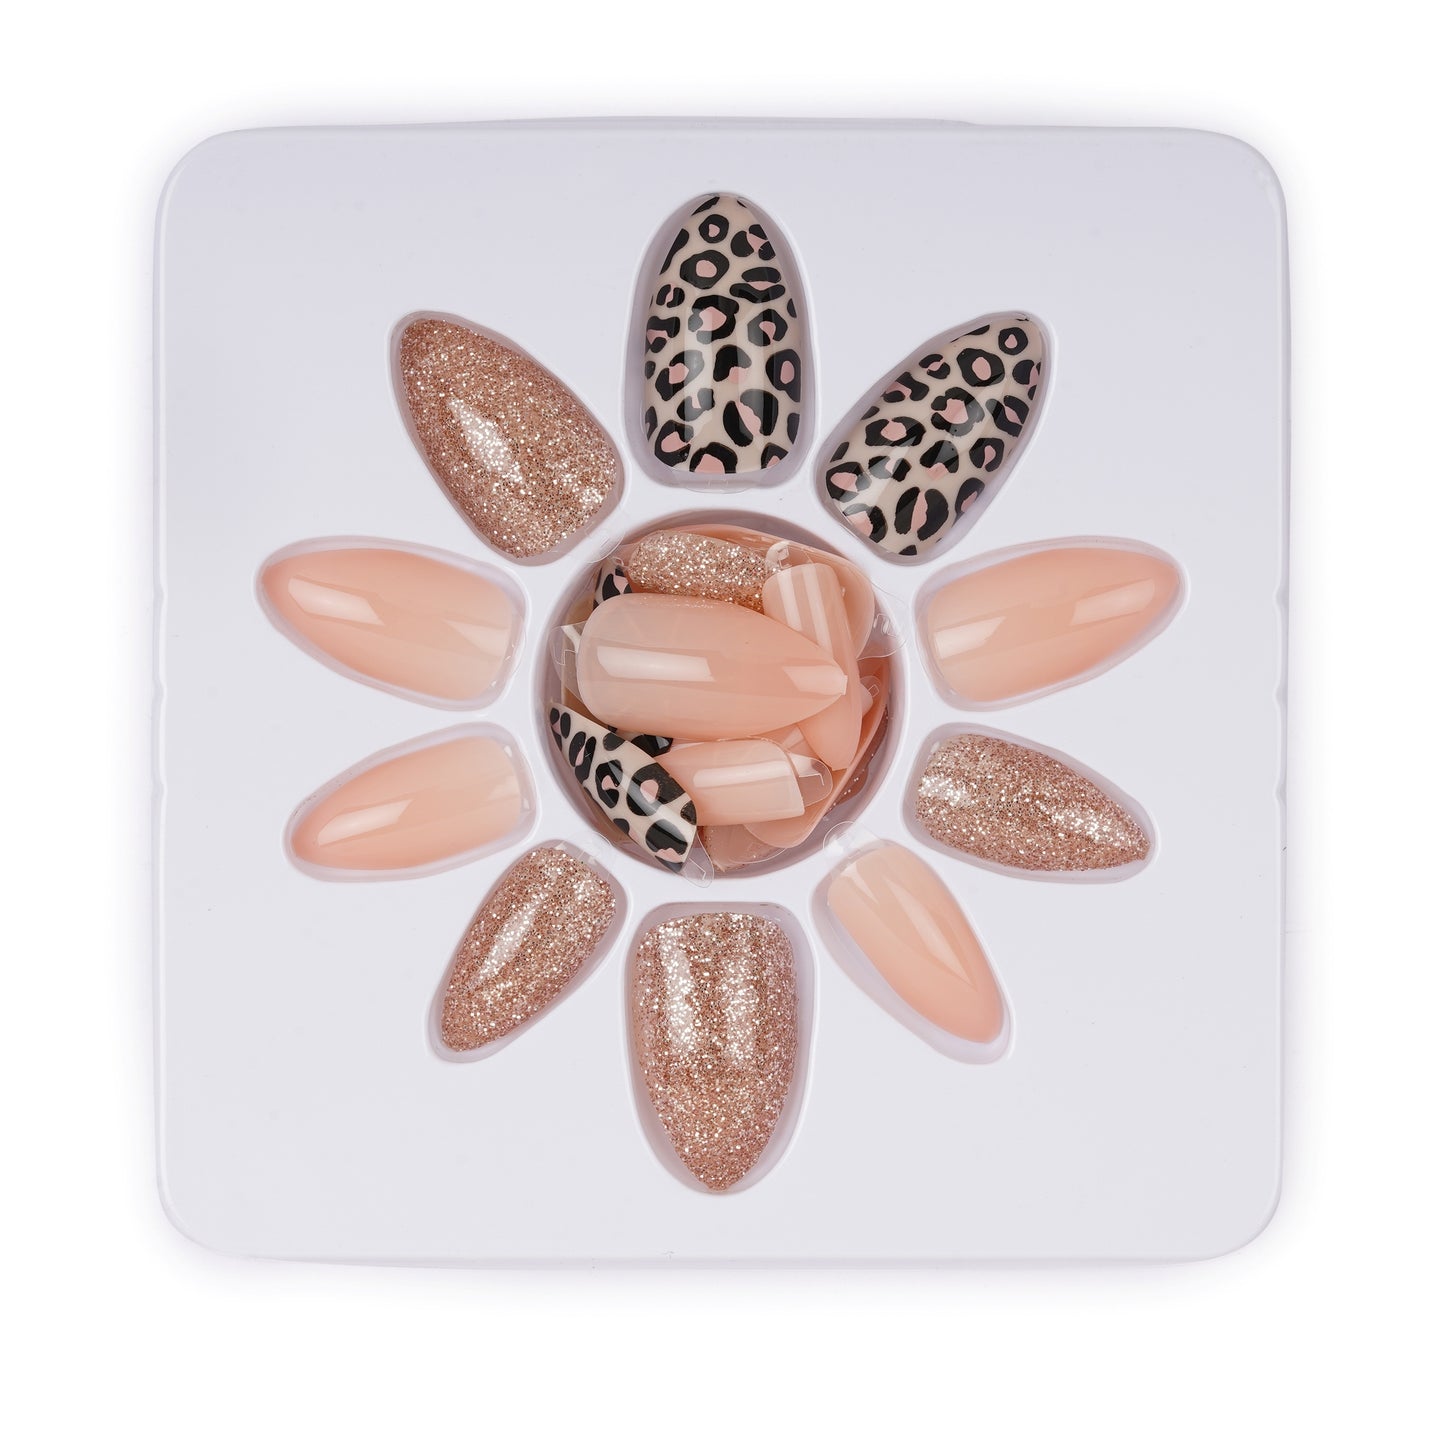 Stick On Nails | Dashing Diva Press Magic Animalier, Blush Pink Acrylic Reusable Press on Nails With Quick Dry Nail Glue, Pack of 2